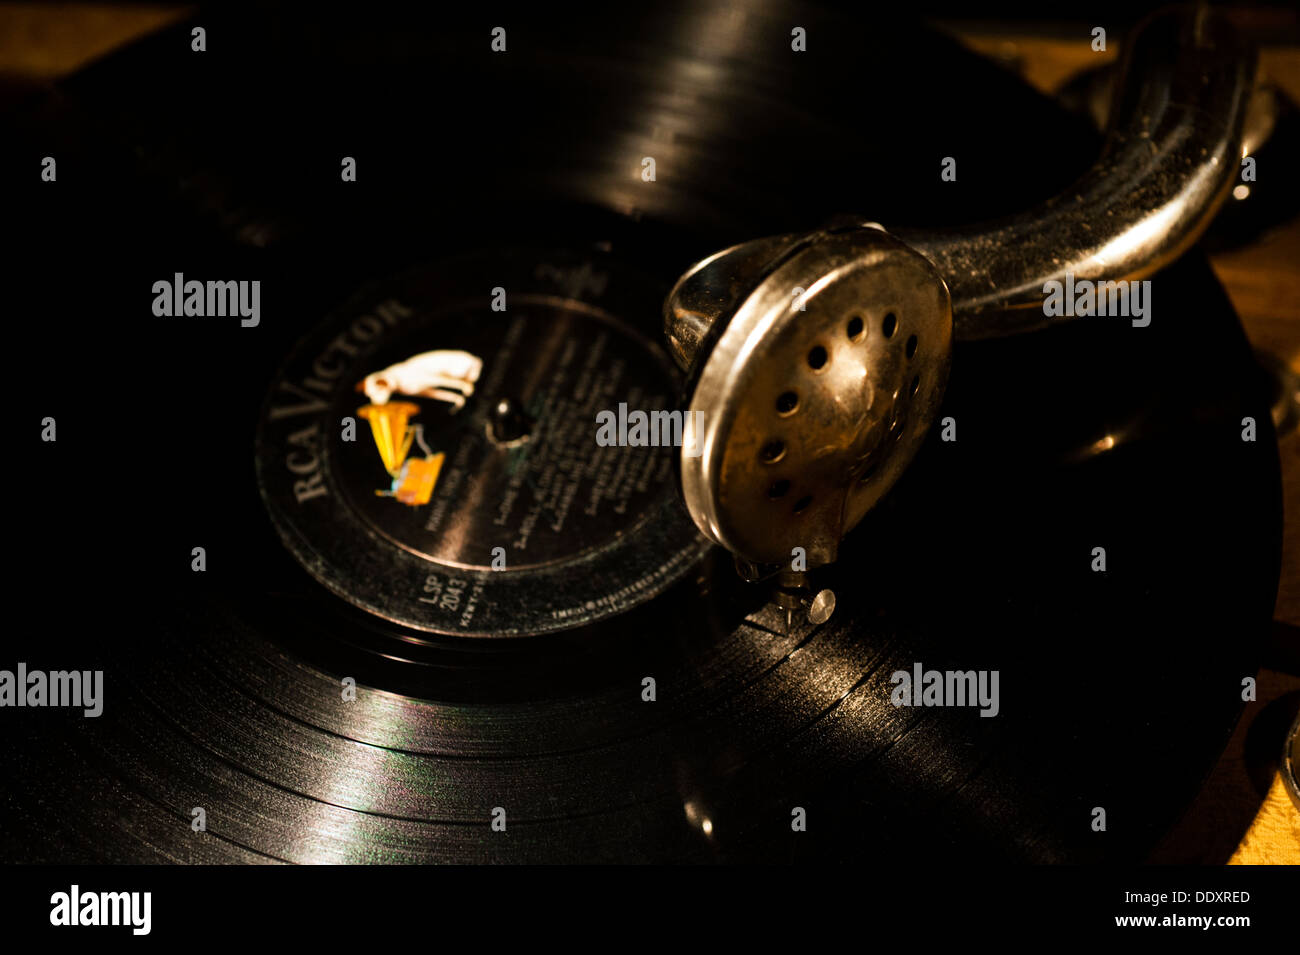 Antique phonograph record player playing a RCA Victor record Stock Photo